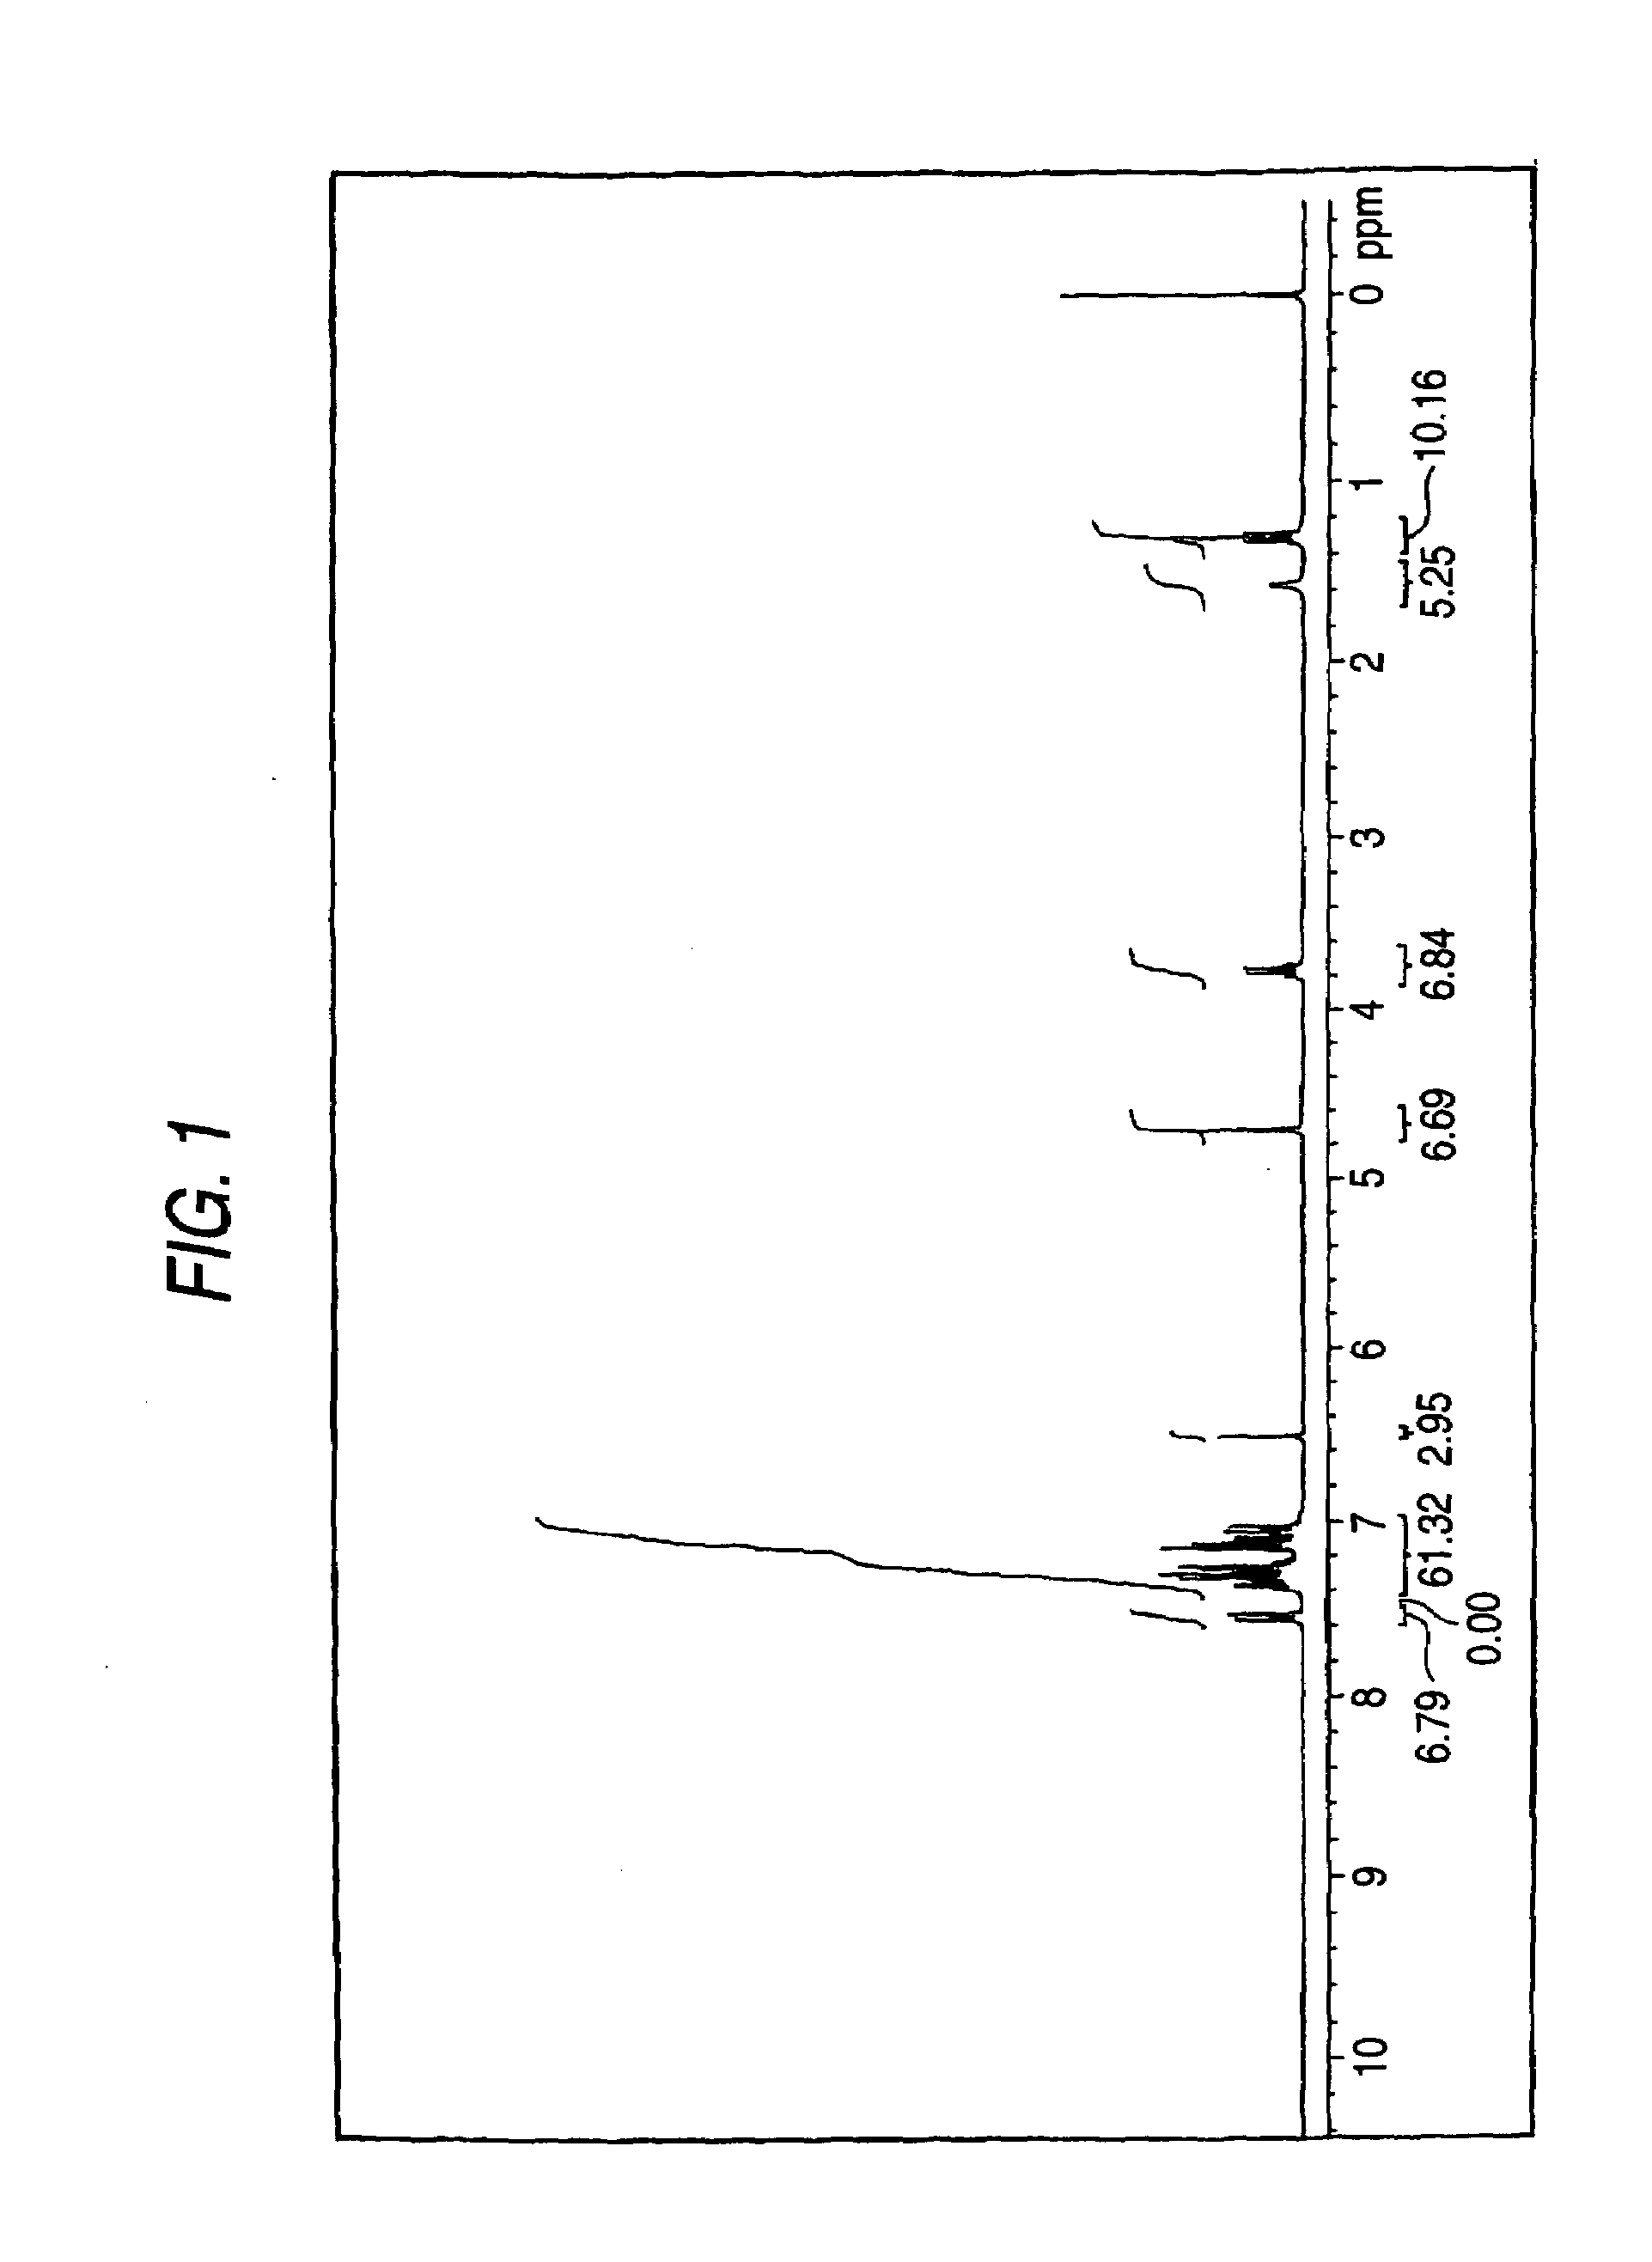 Photosensitive composition and novel compound used therefor